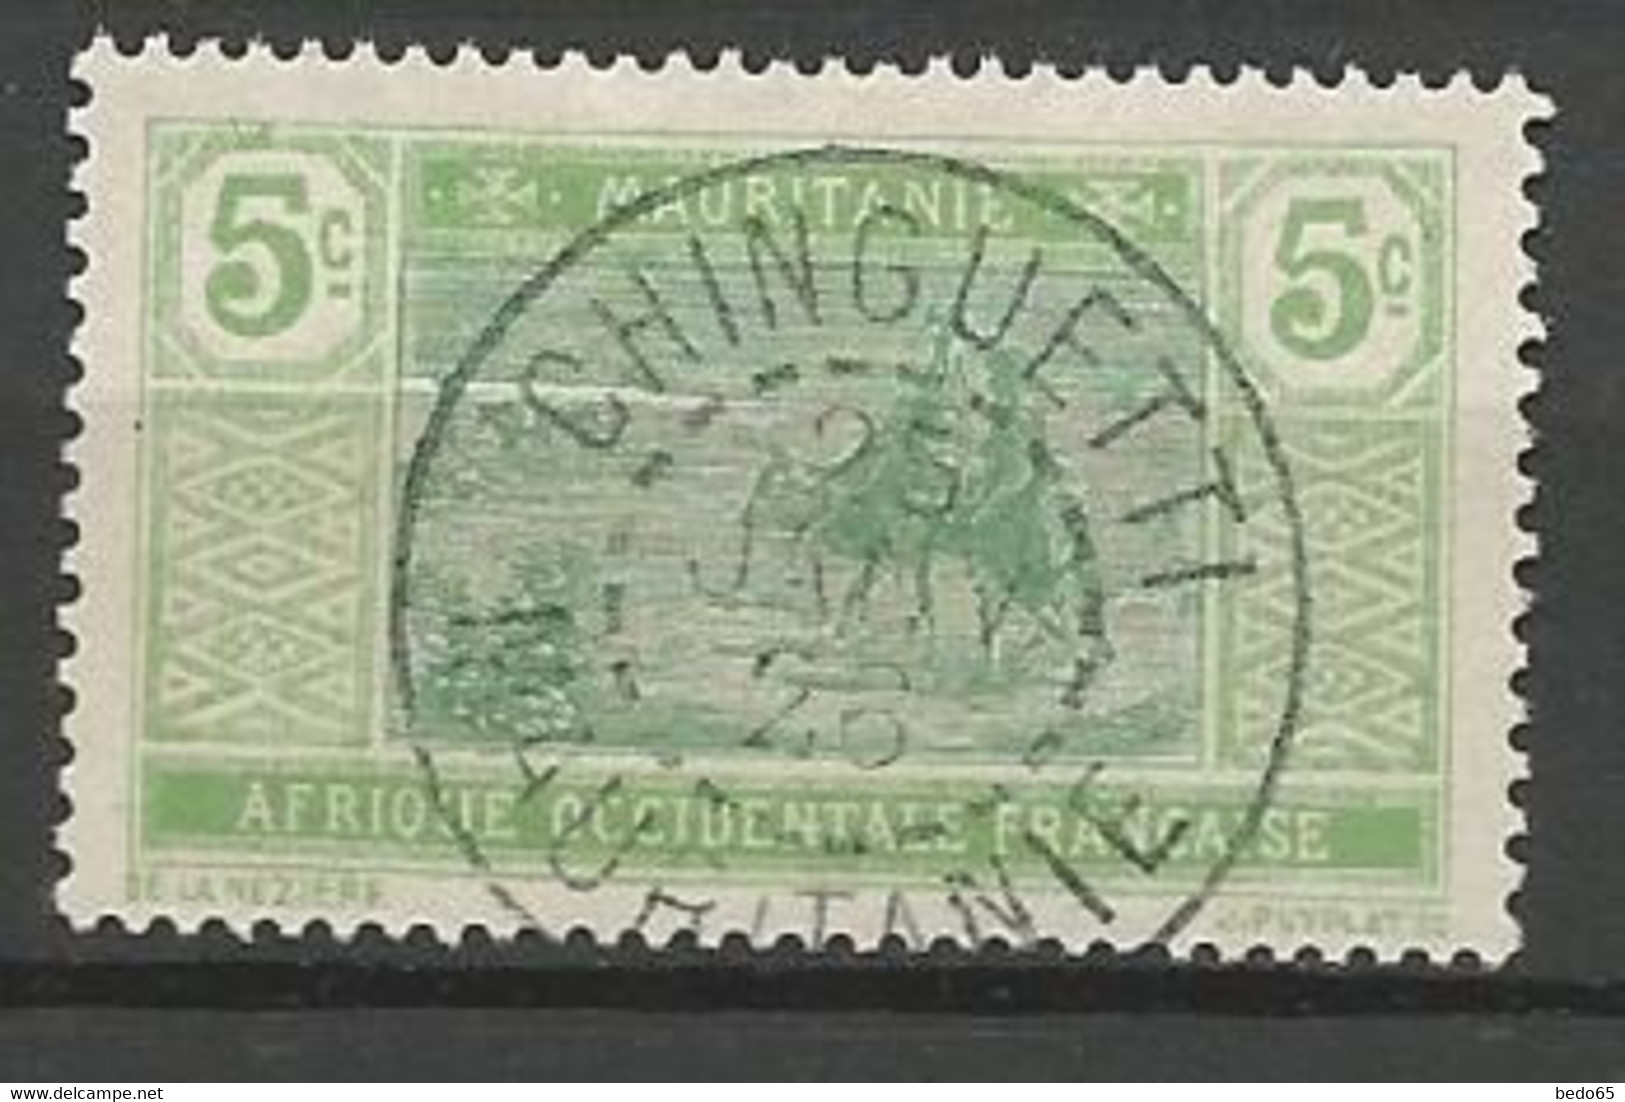 MAURITANIE N° 20 CACHET CHINGUETTI - Used Stamps